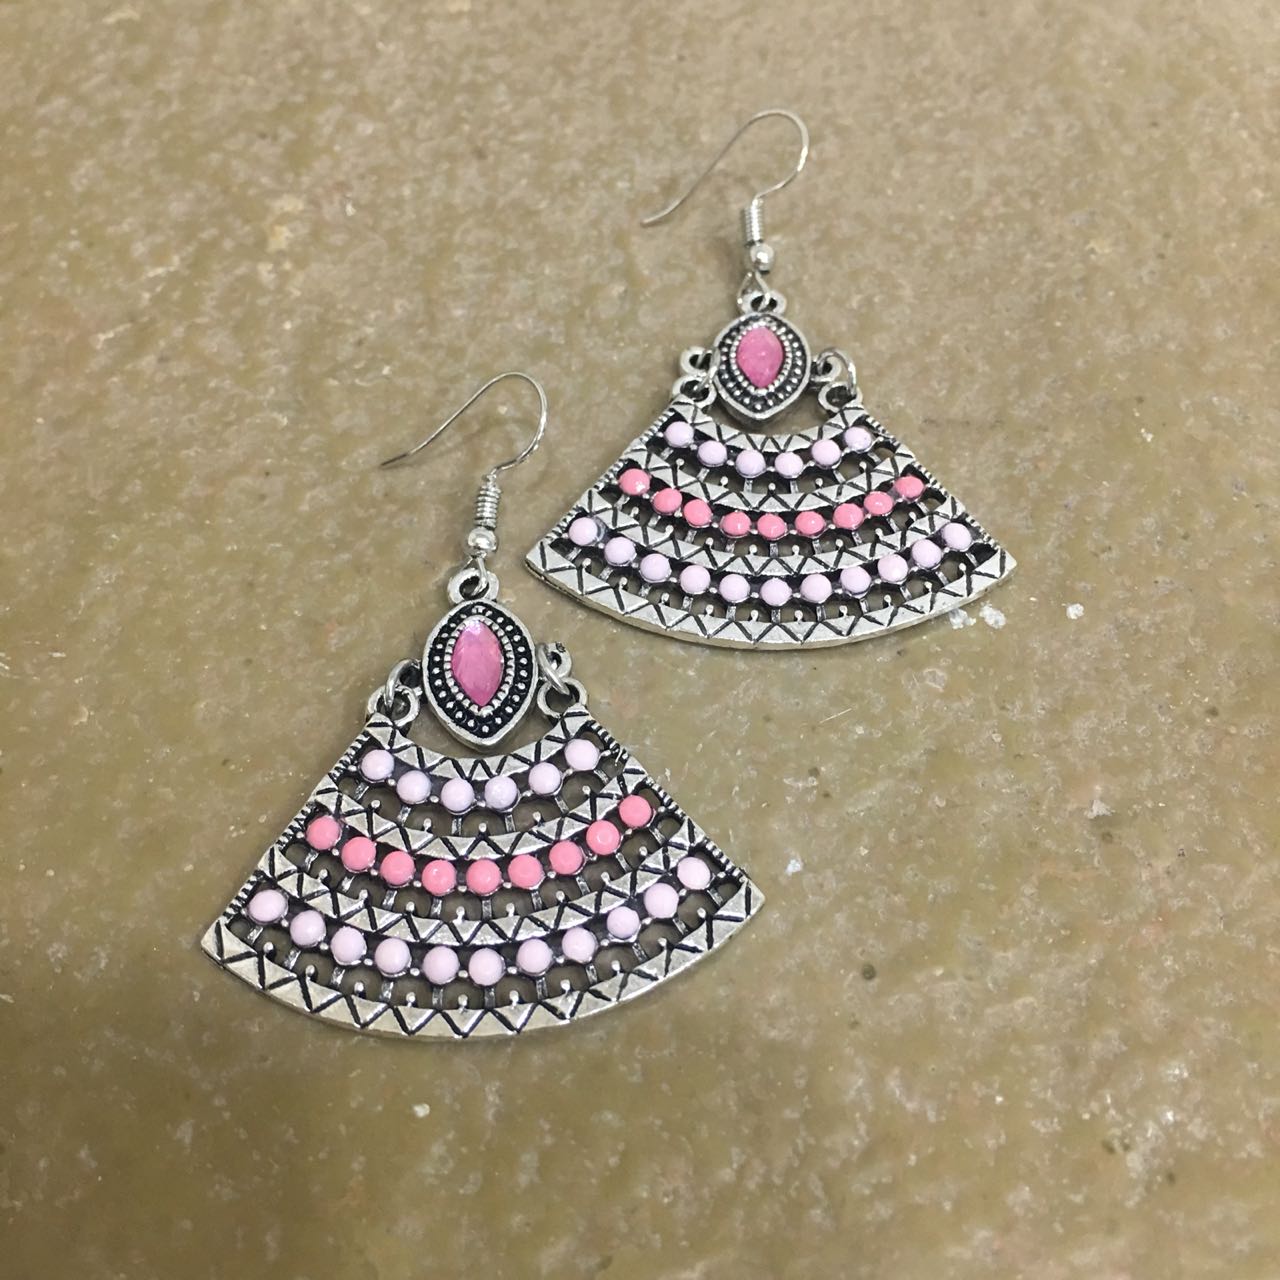 image for Navratri Earring Traditional Ethnic Bohemian Antique Metal Kashmir Tribal German Oxidized Afghani Silver Hook Earring Pink White Enamel Work with Beads Earrings for Women and Girls